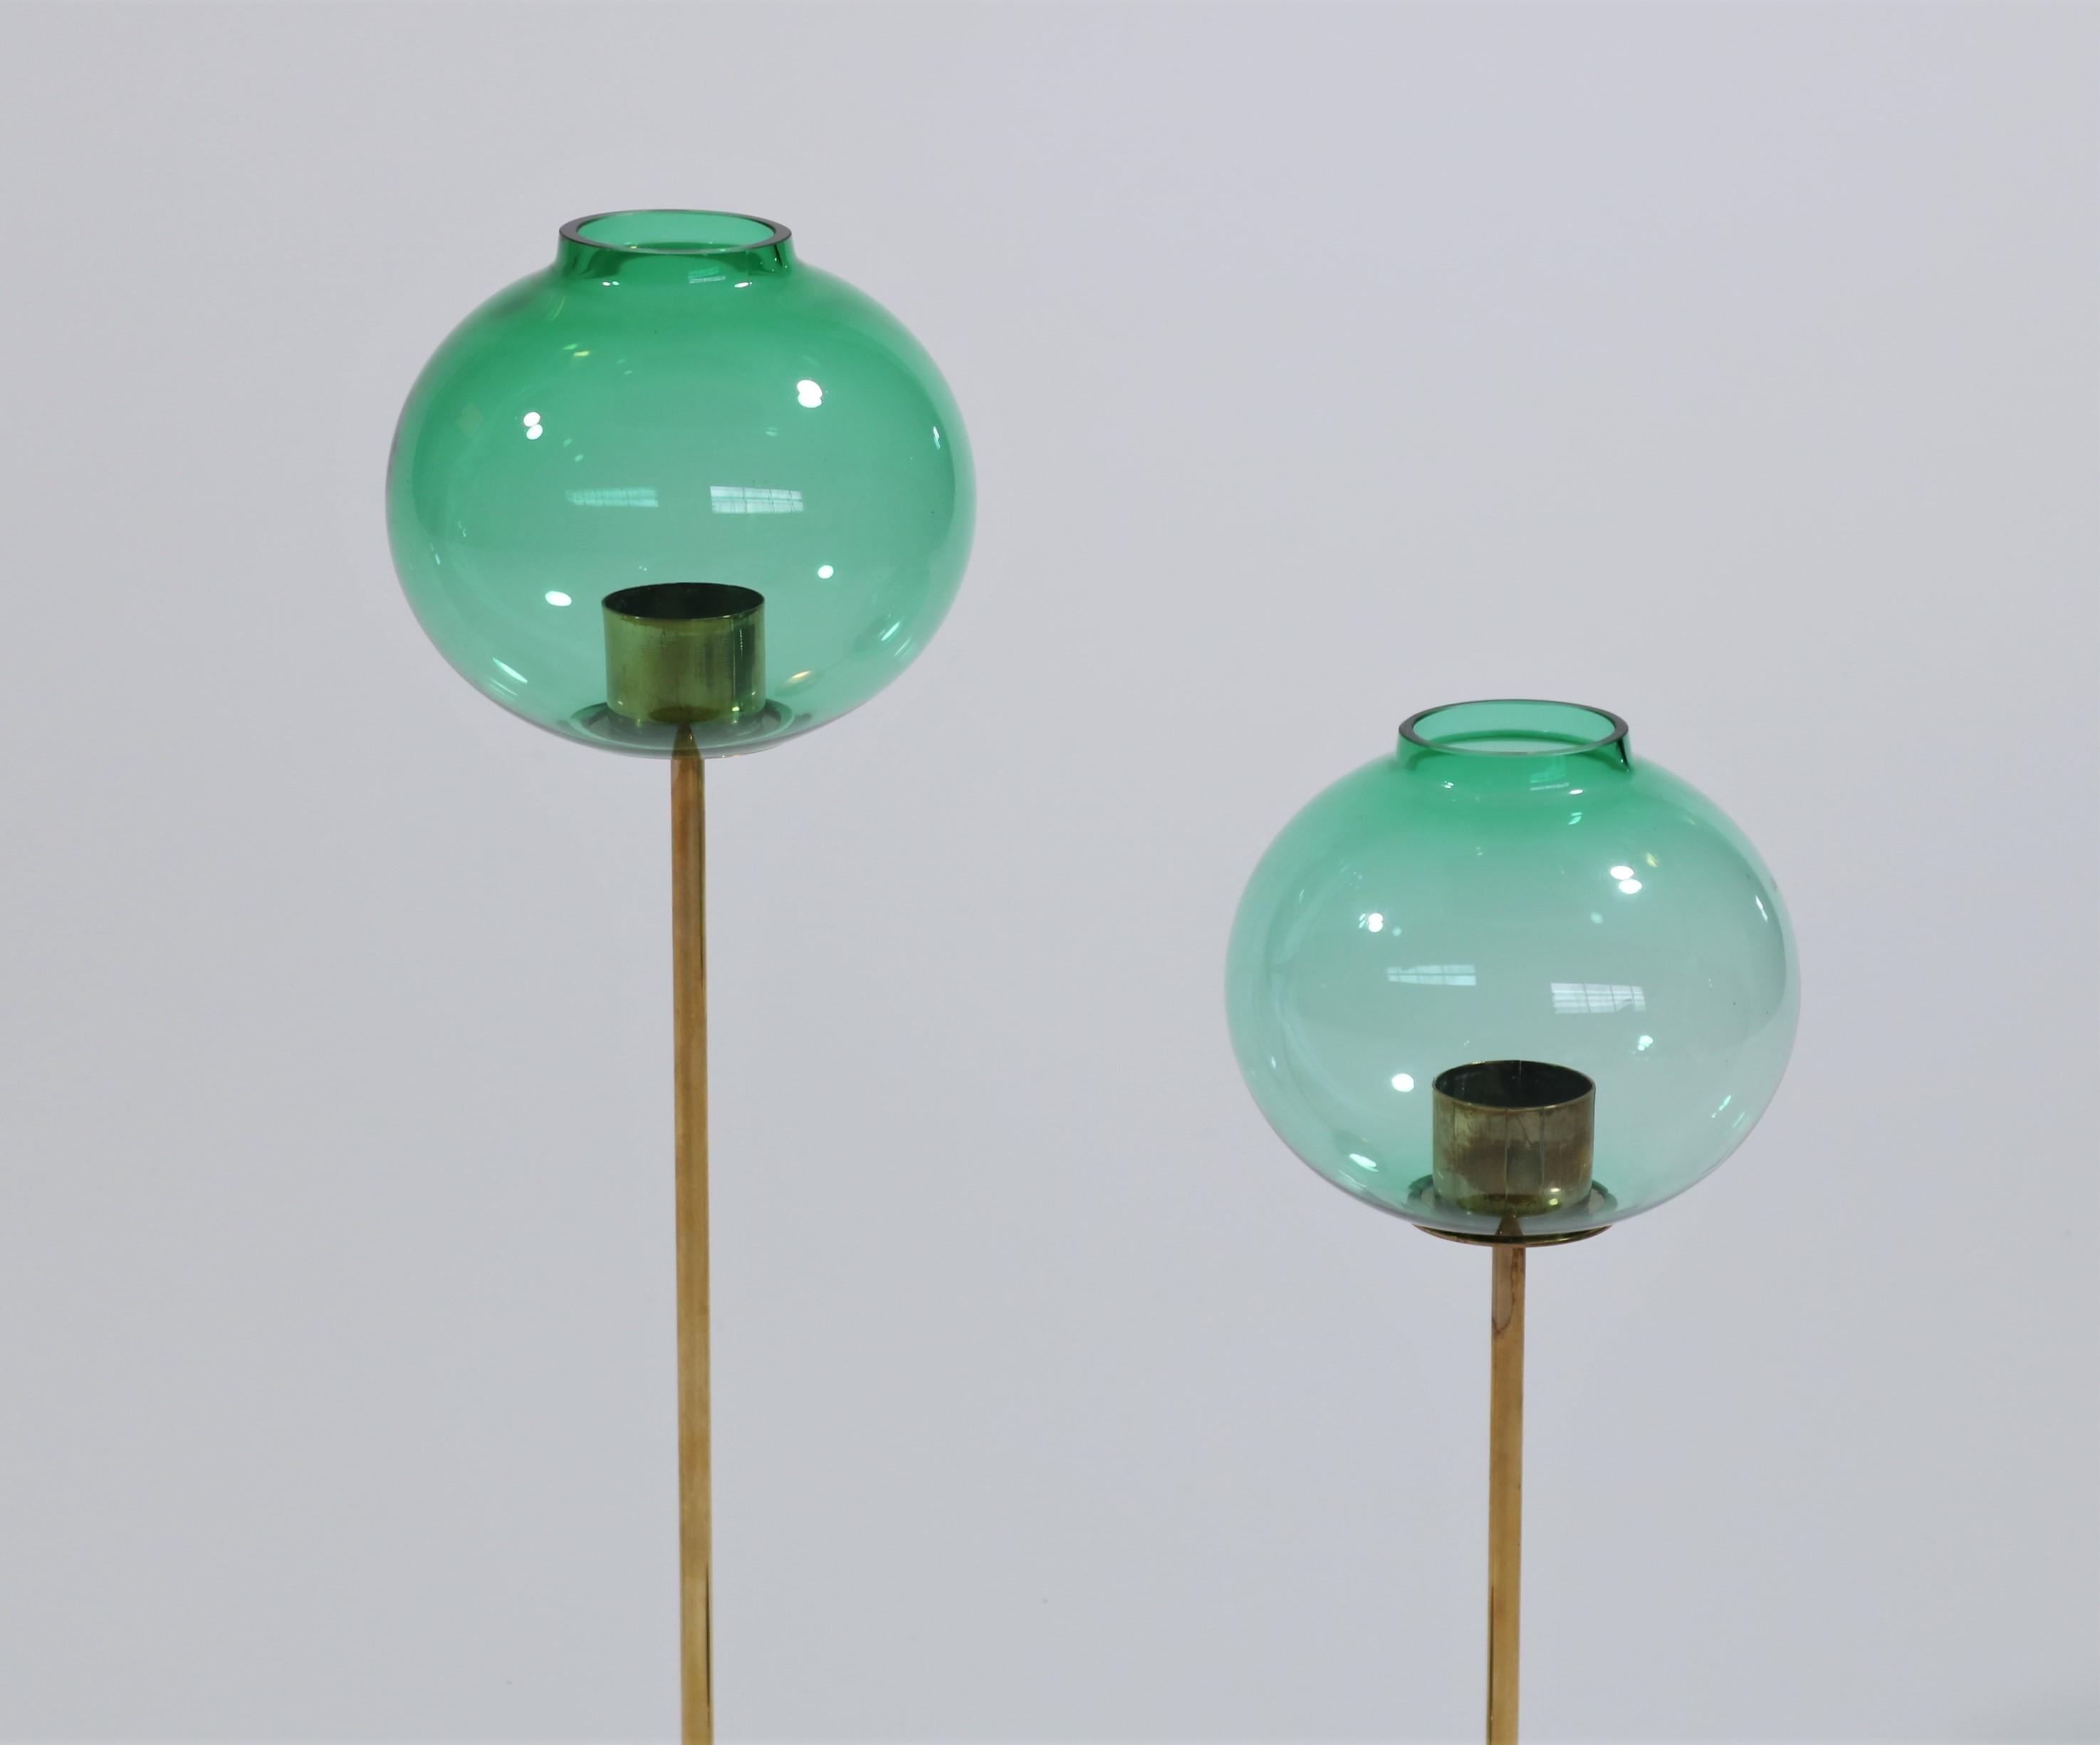 Elegant pair of candlesticks in brass and beautiful turquoise mouth-blown glass by Swedish designer Hans Agne Jakobsson. These candlesticks were manufactured by Swedish company 